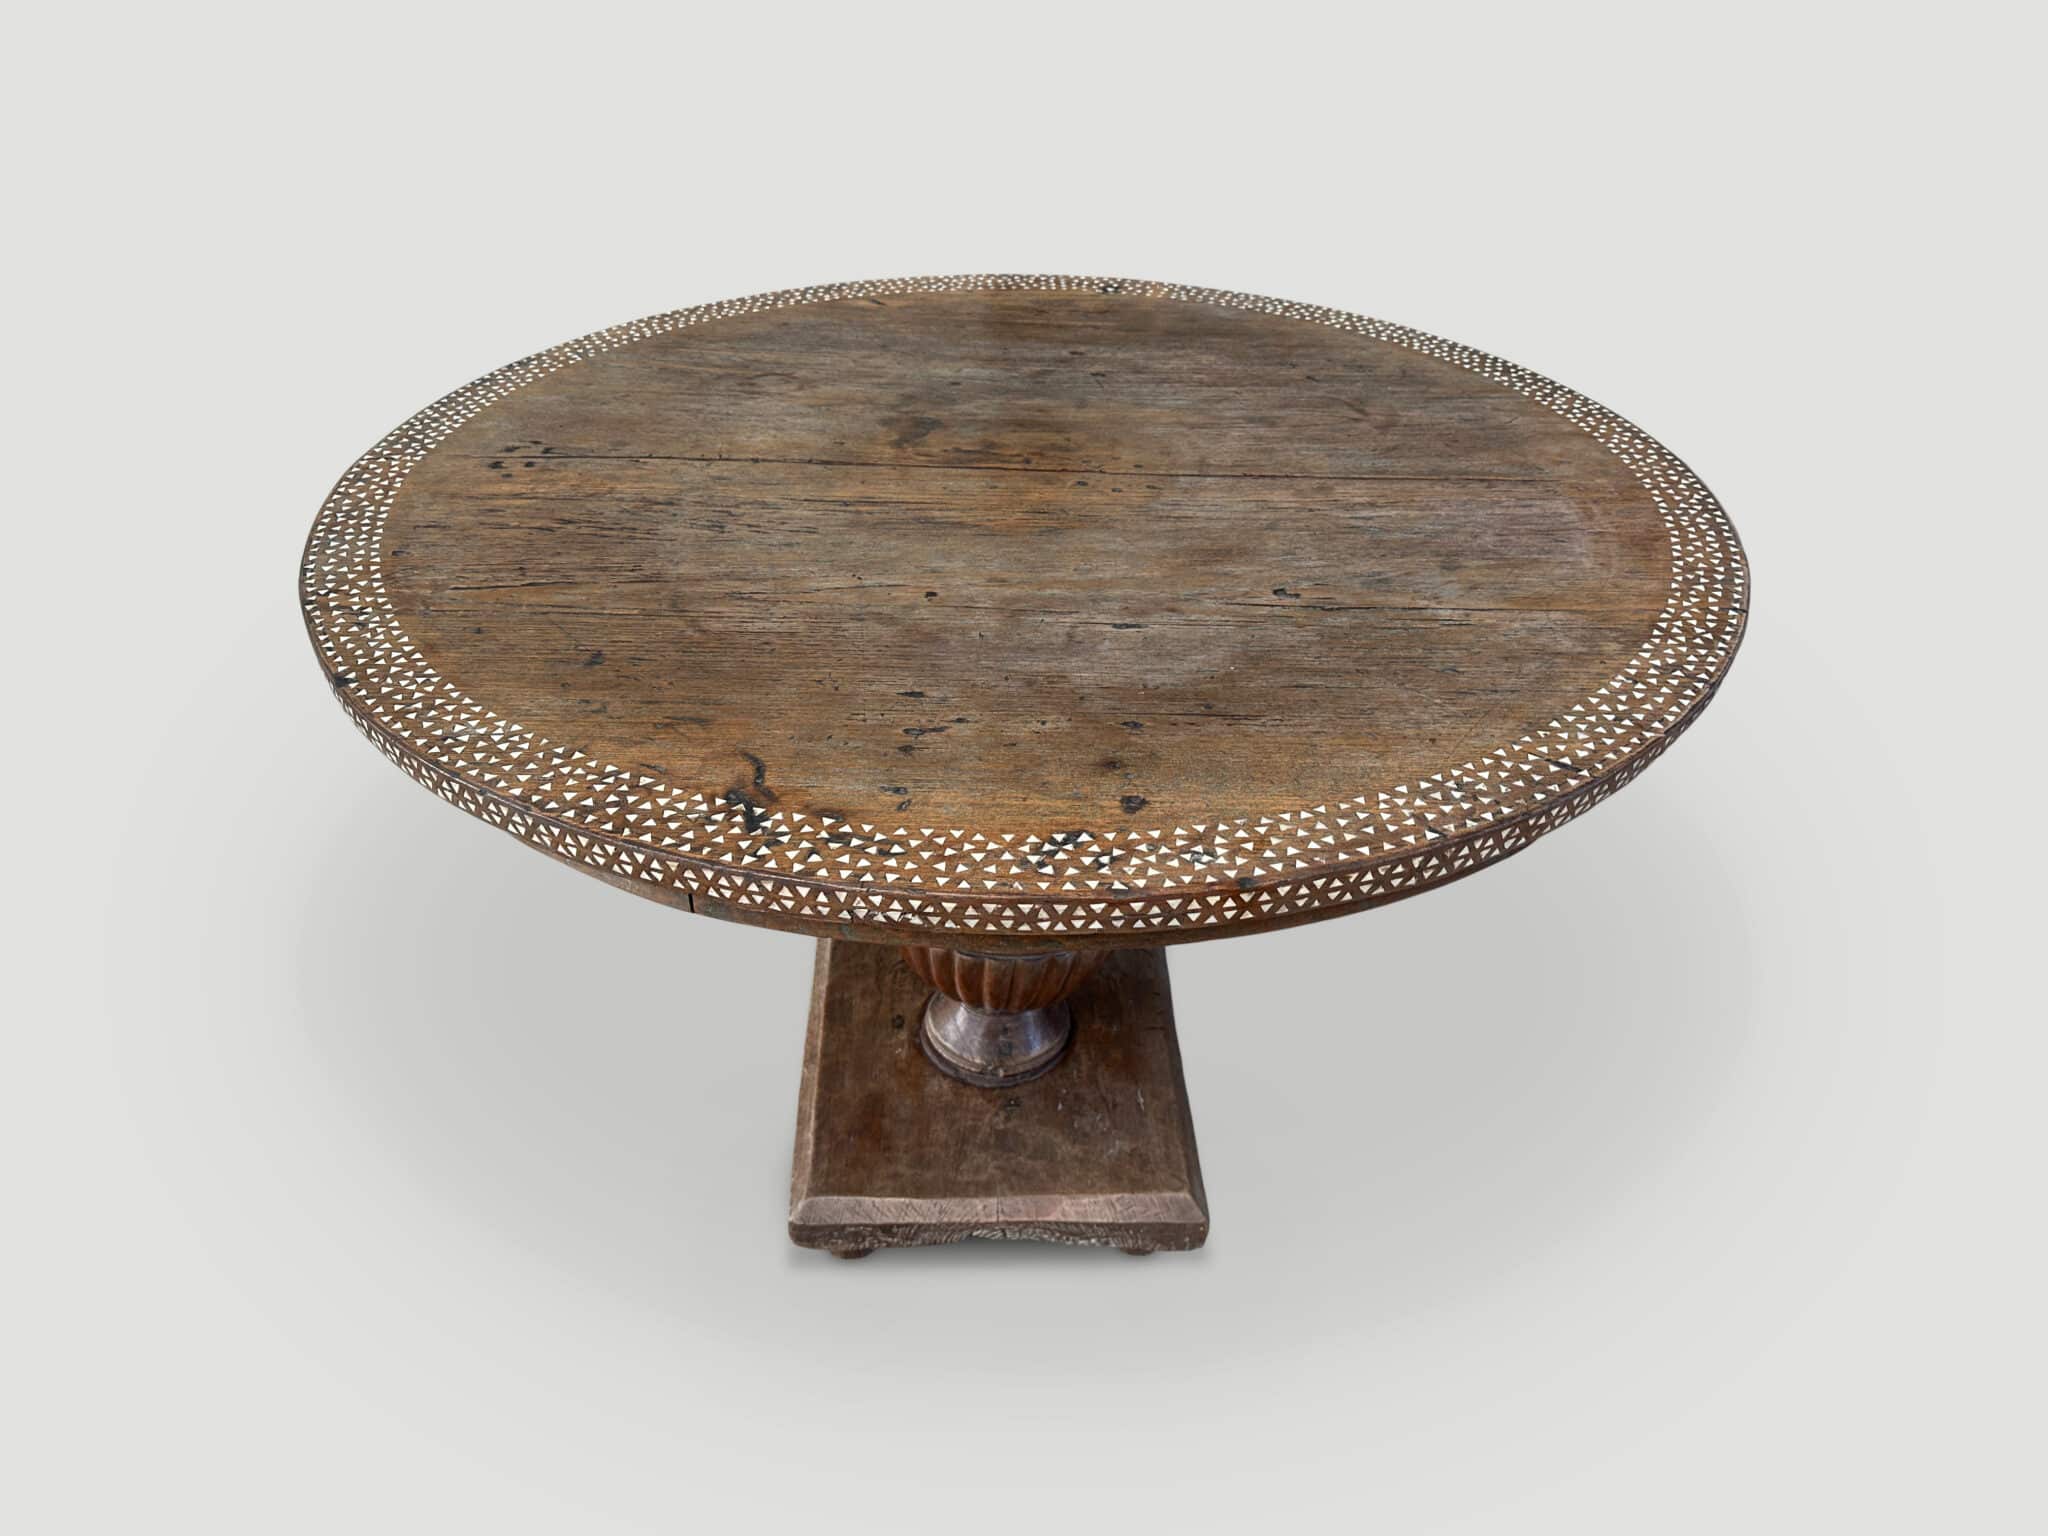 Colonial teak wood round dining table or entry table